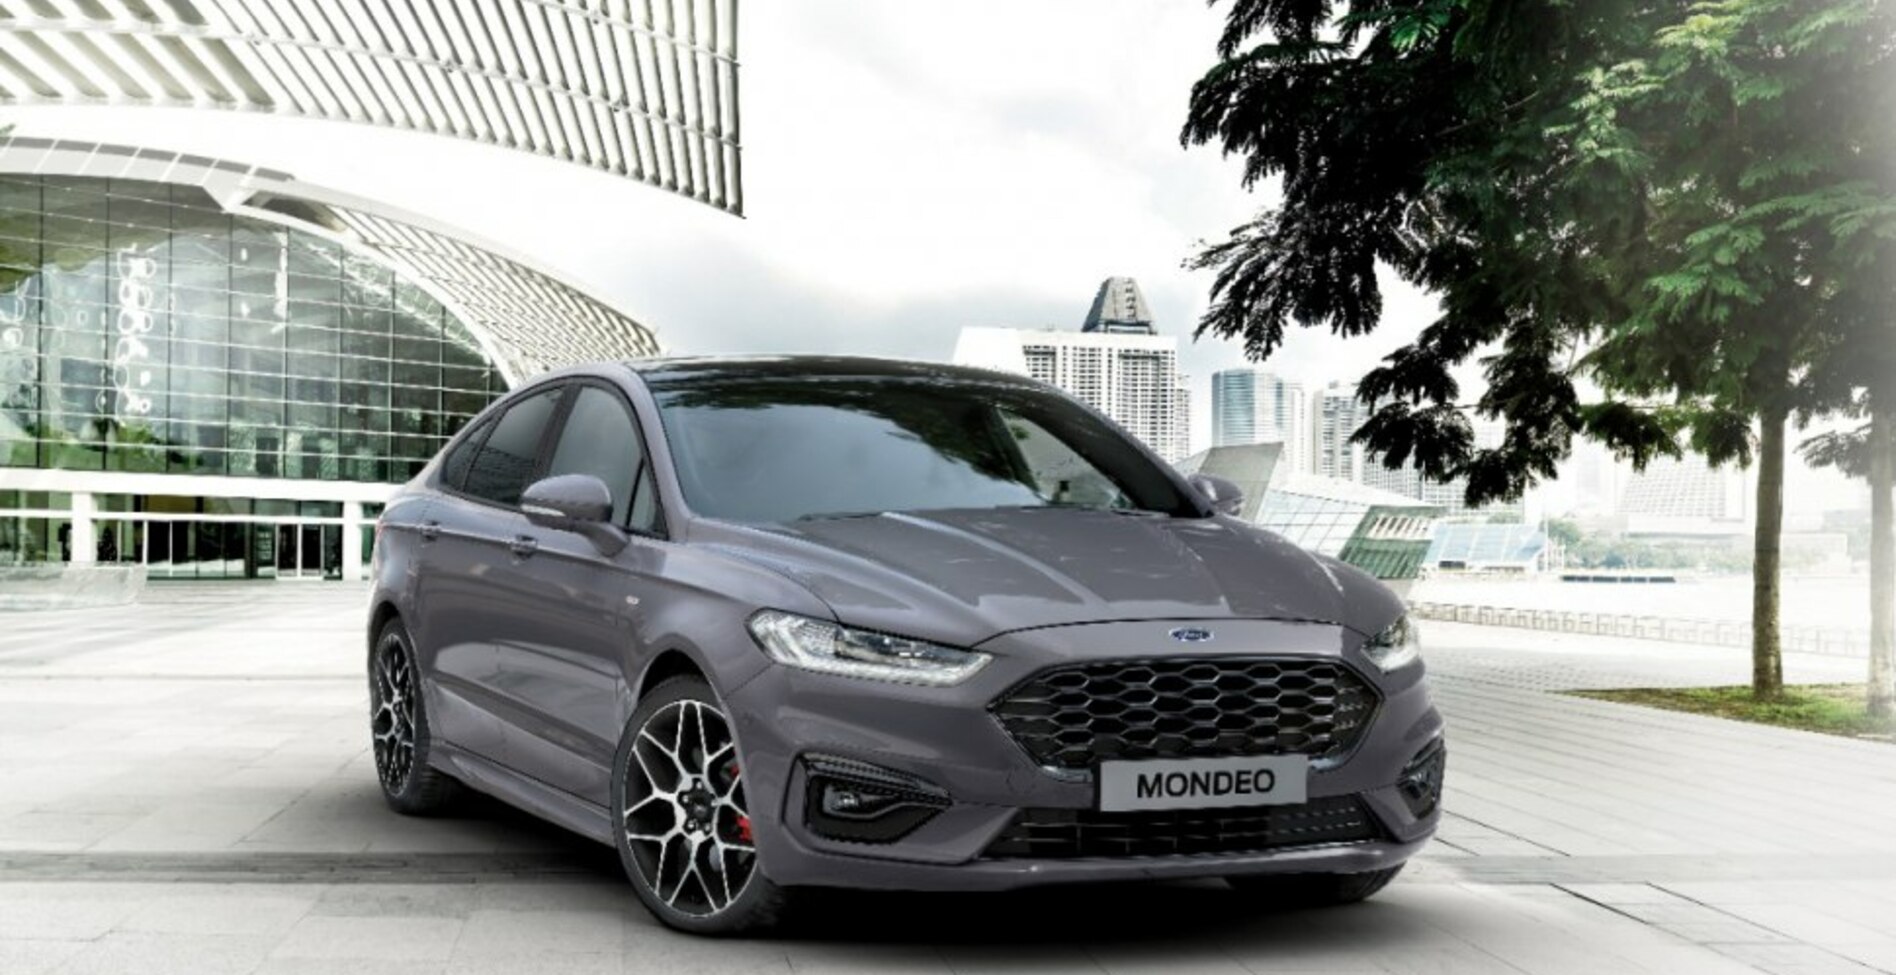 Ford Mondeo IV Sedan (facelift 2019) 2.0 iVCT (187 Hp) Hybrid Automatic 2019, 2020, 2021 